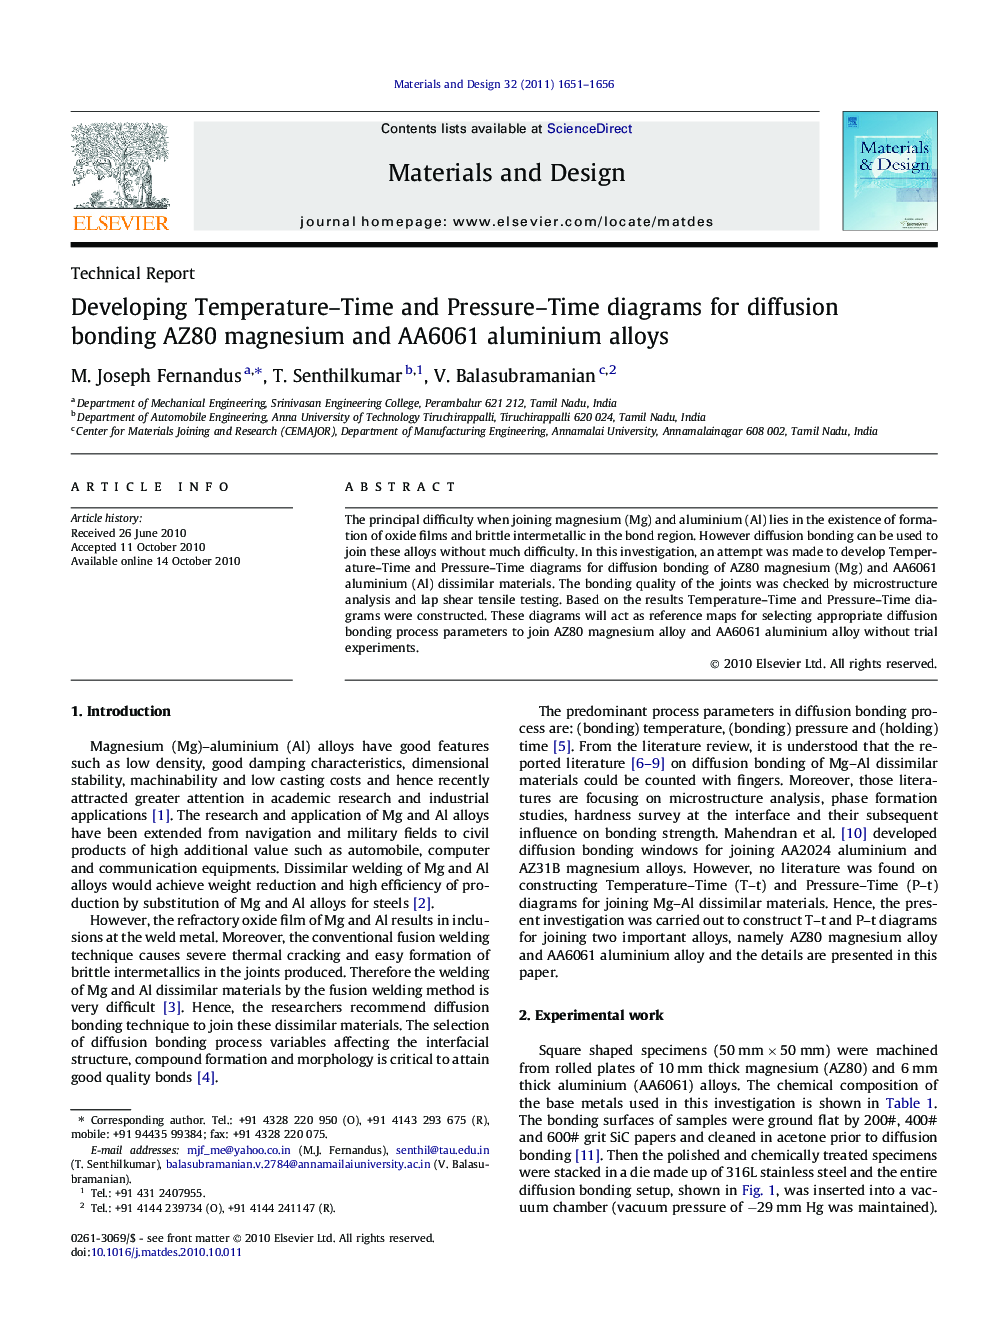 Developing Temperature–Time and Pressure–Time diagrams for diffusion bonding AZ80 magnesium and AA6061 aluminium alloys